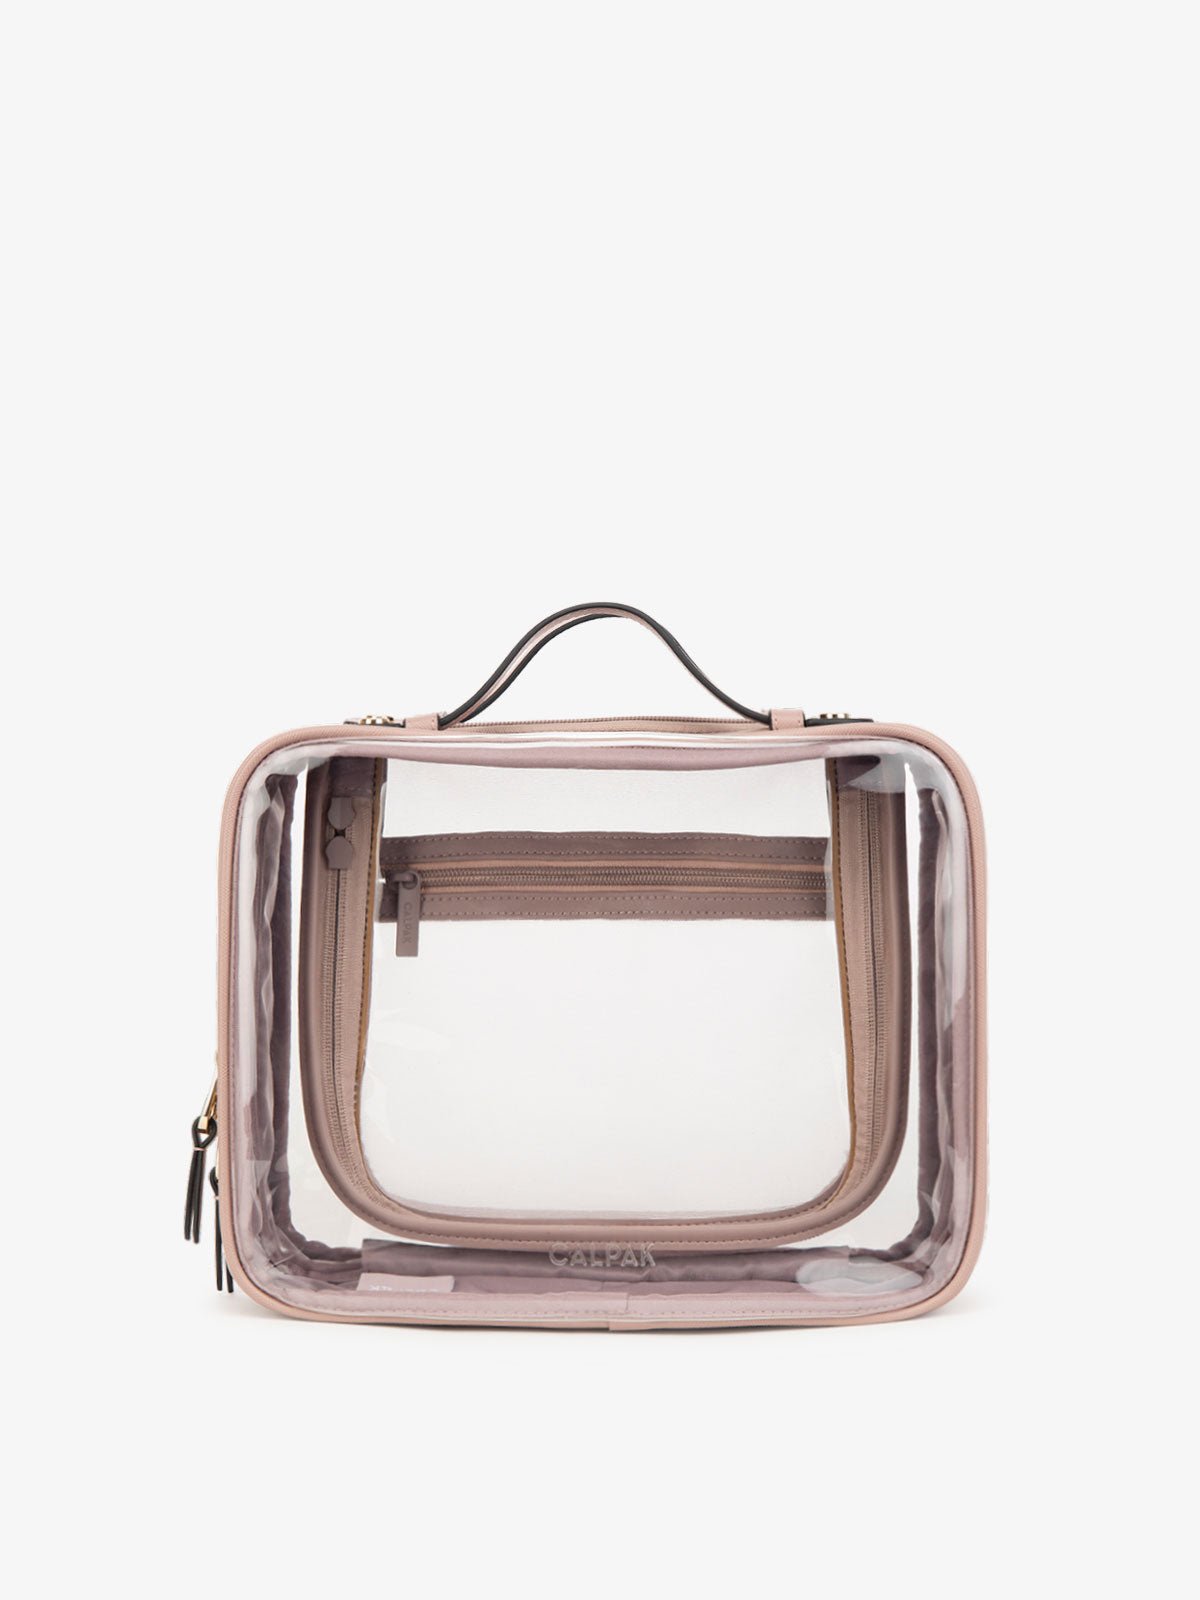 CALPAK clear makeup bag with compartments